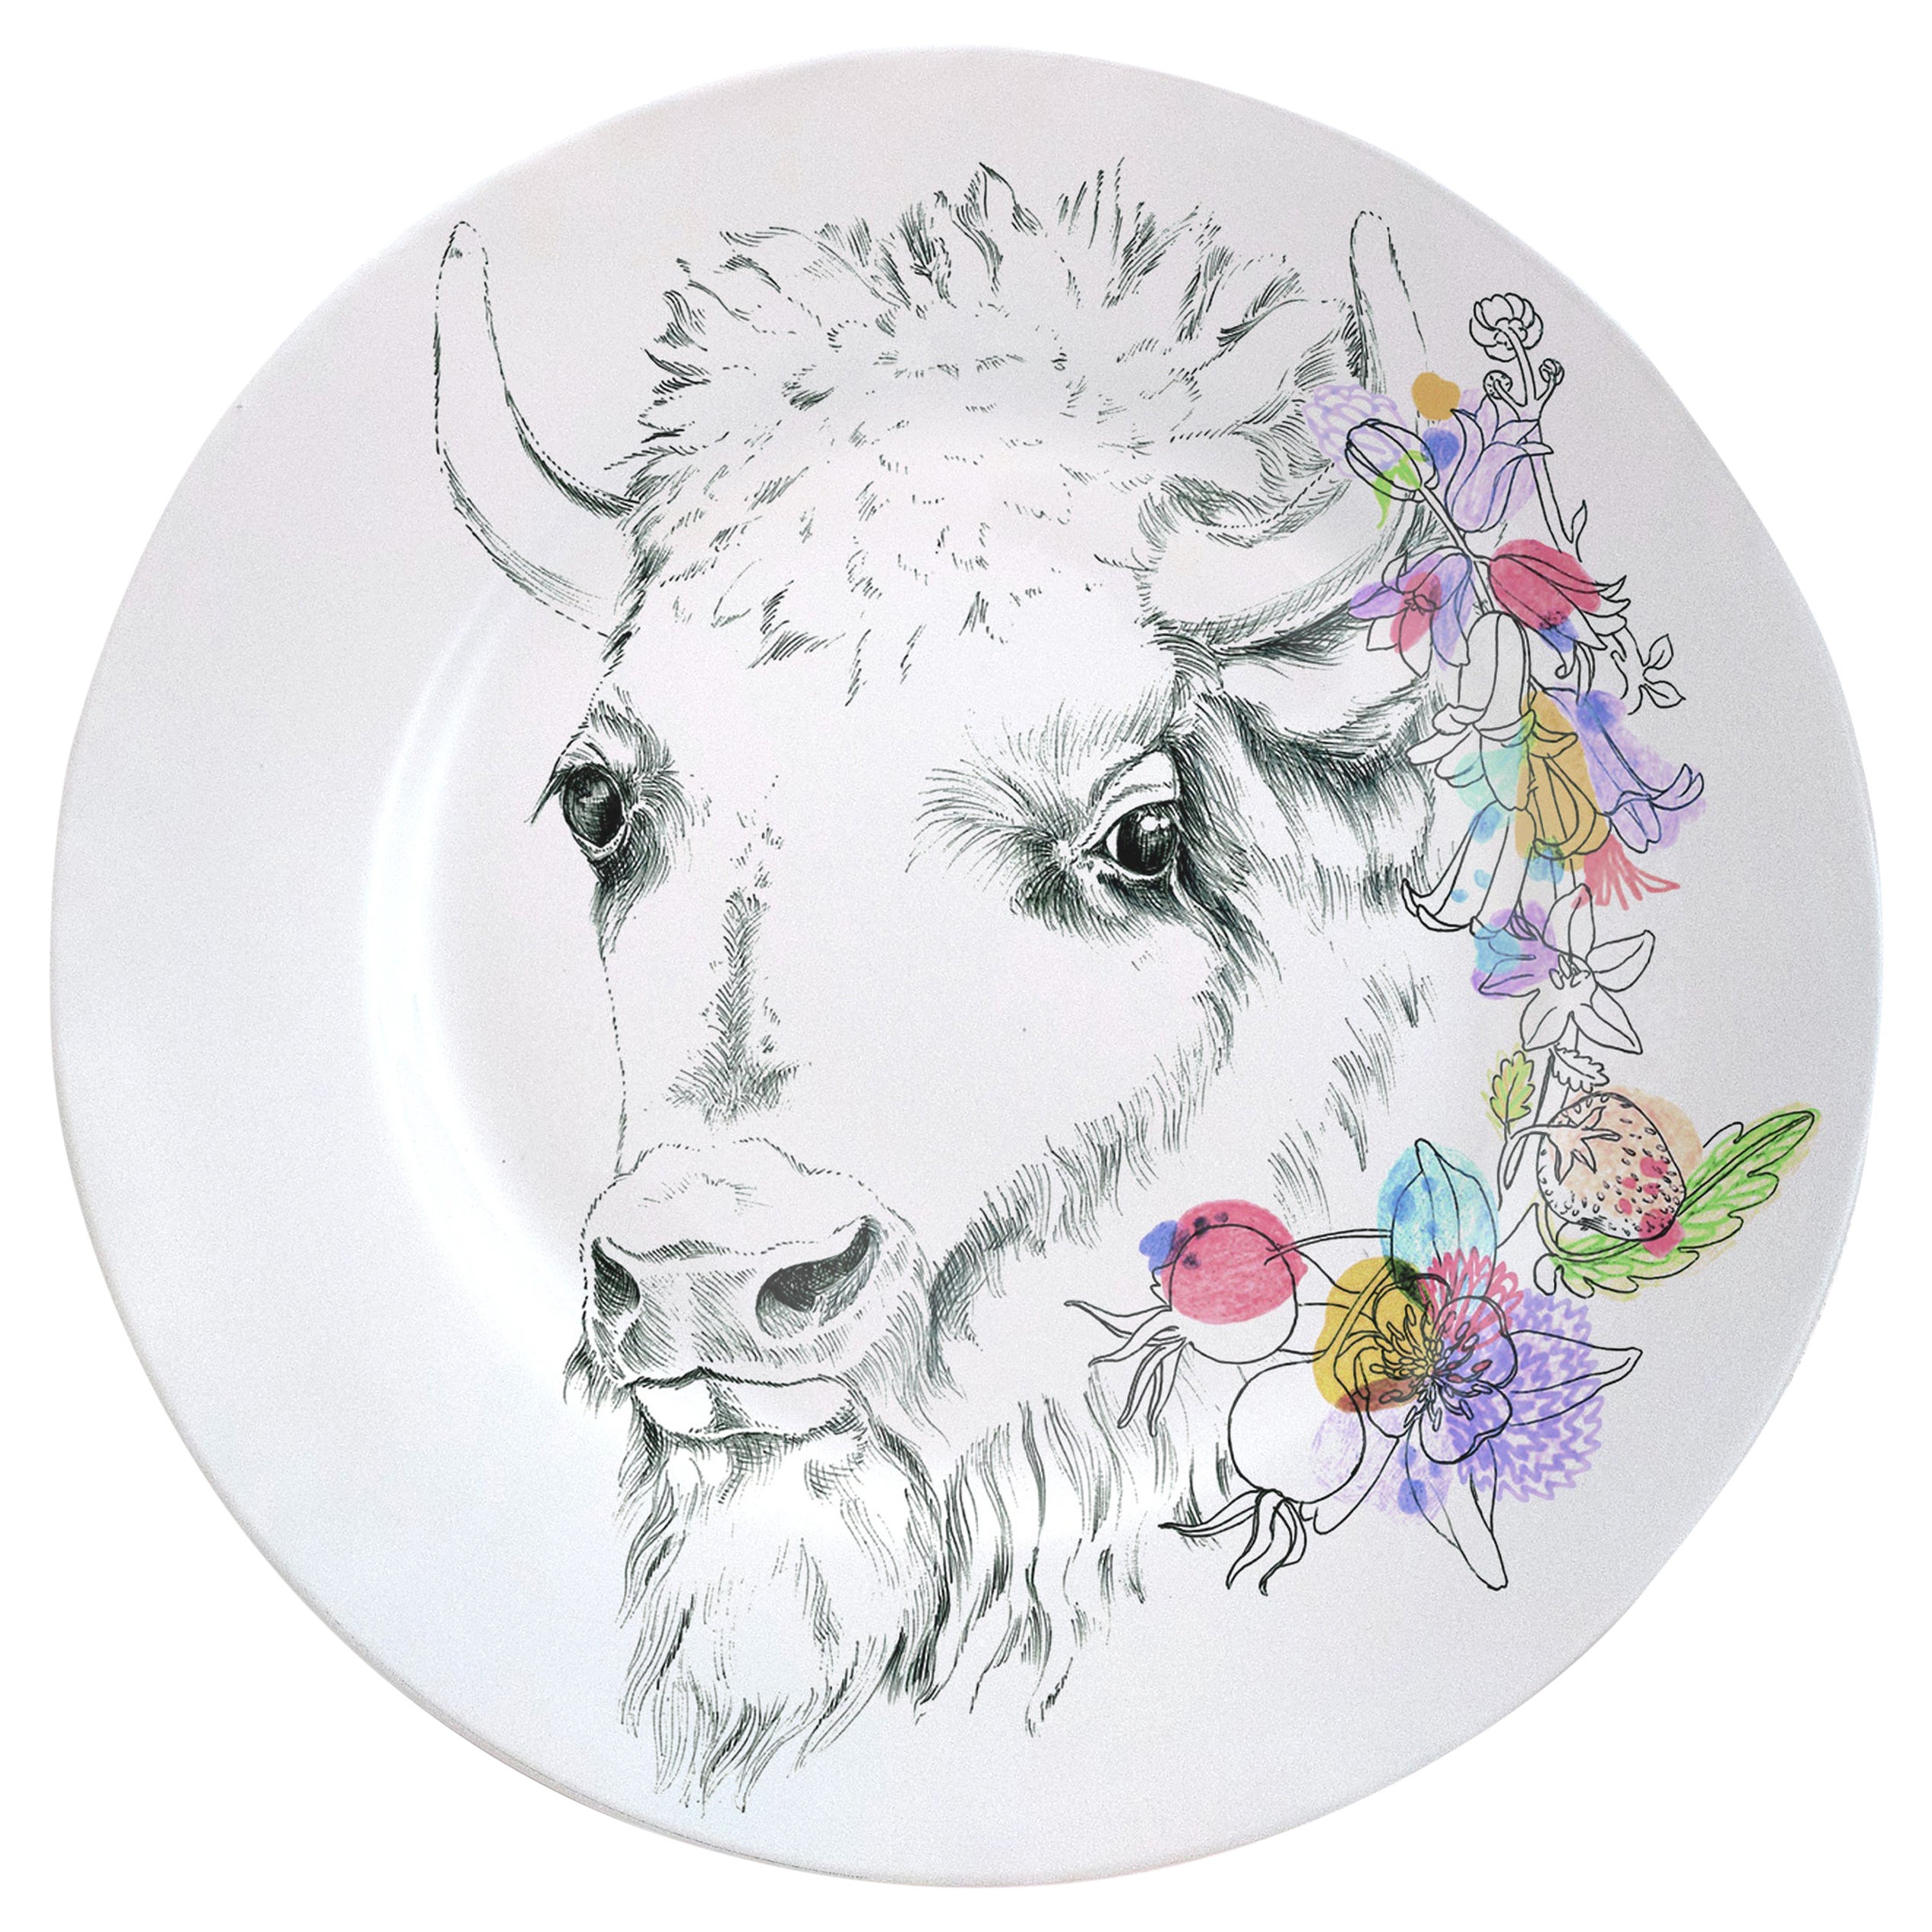 Ode to the Woods, Contemporary Porcelain Dinner Plate with Bison and Flowers